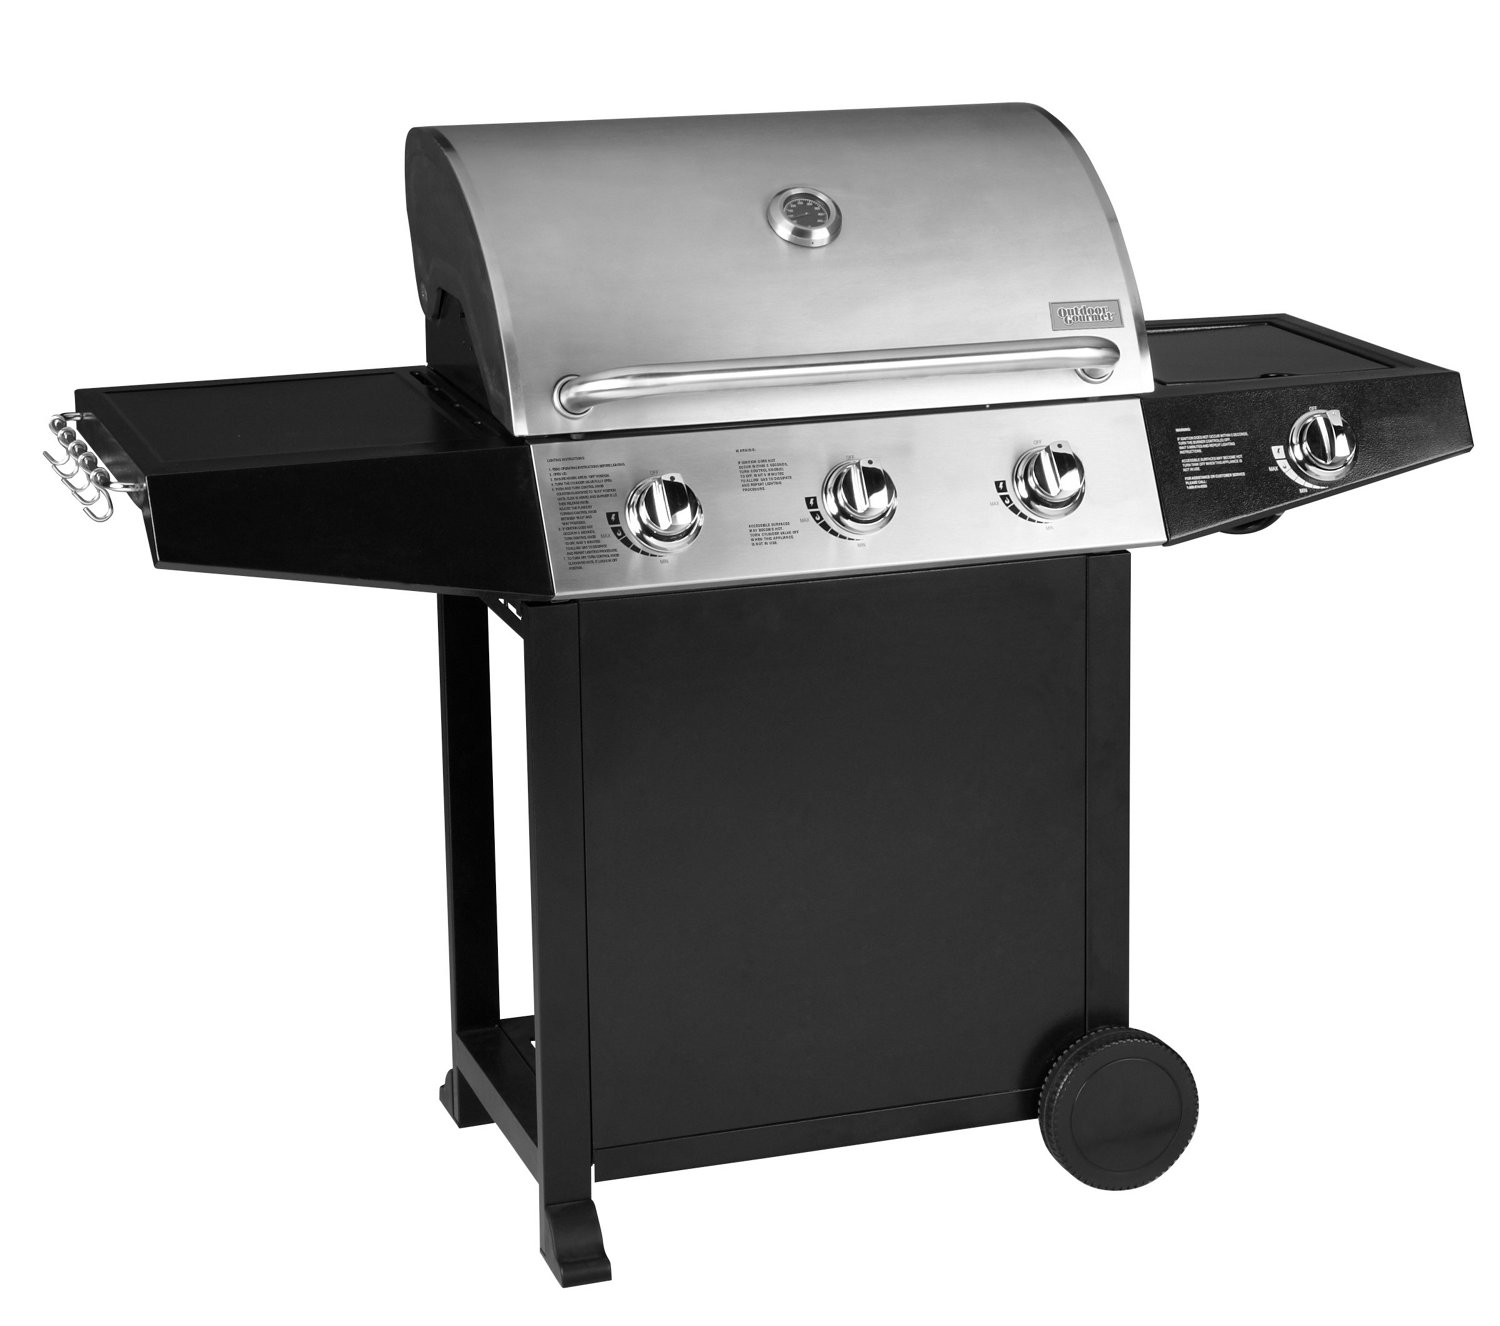 Gas Grill: Outdoor Gourmet Triton Gas Grill